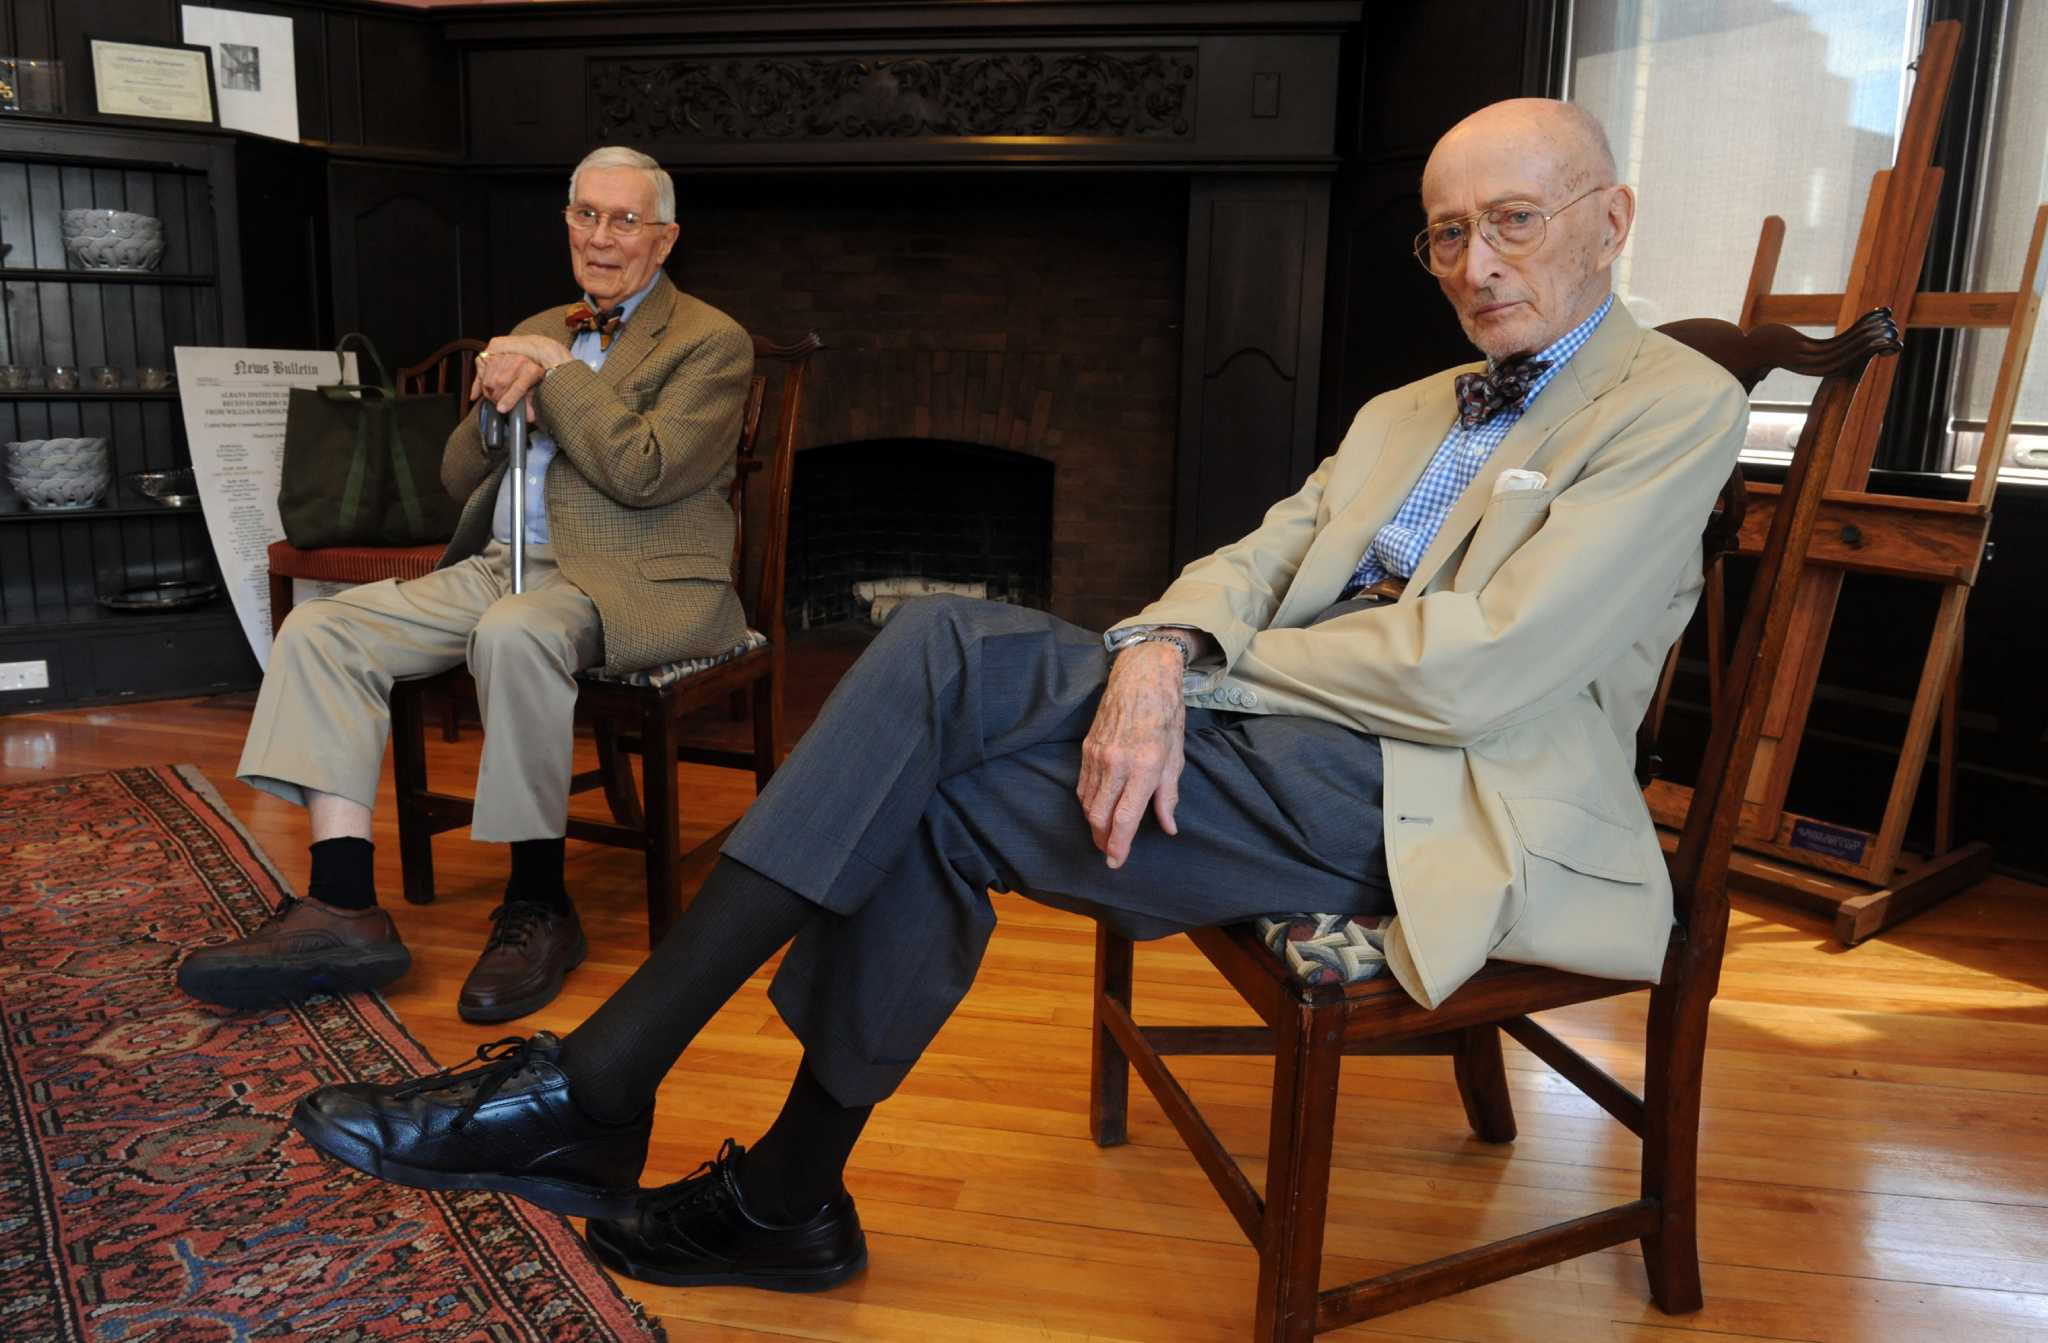 Albany Institute celebrates contributions of Norman Rice and Jim Gwynn